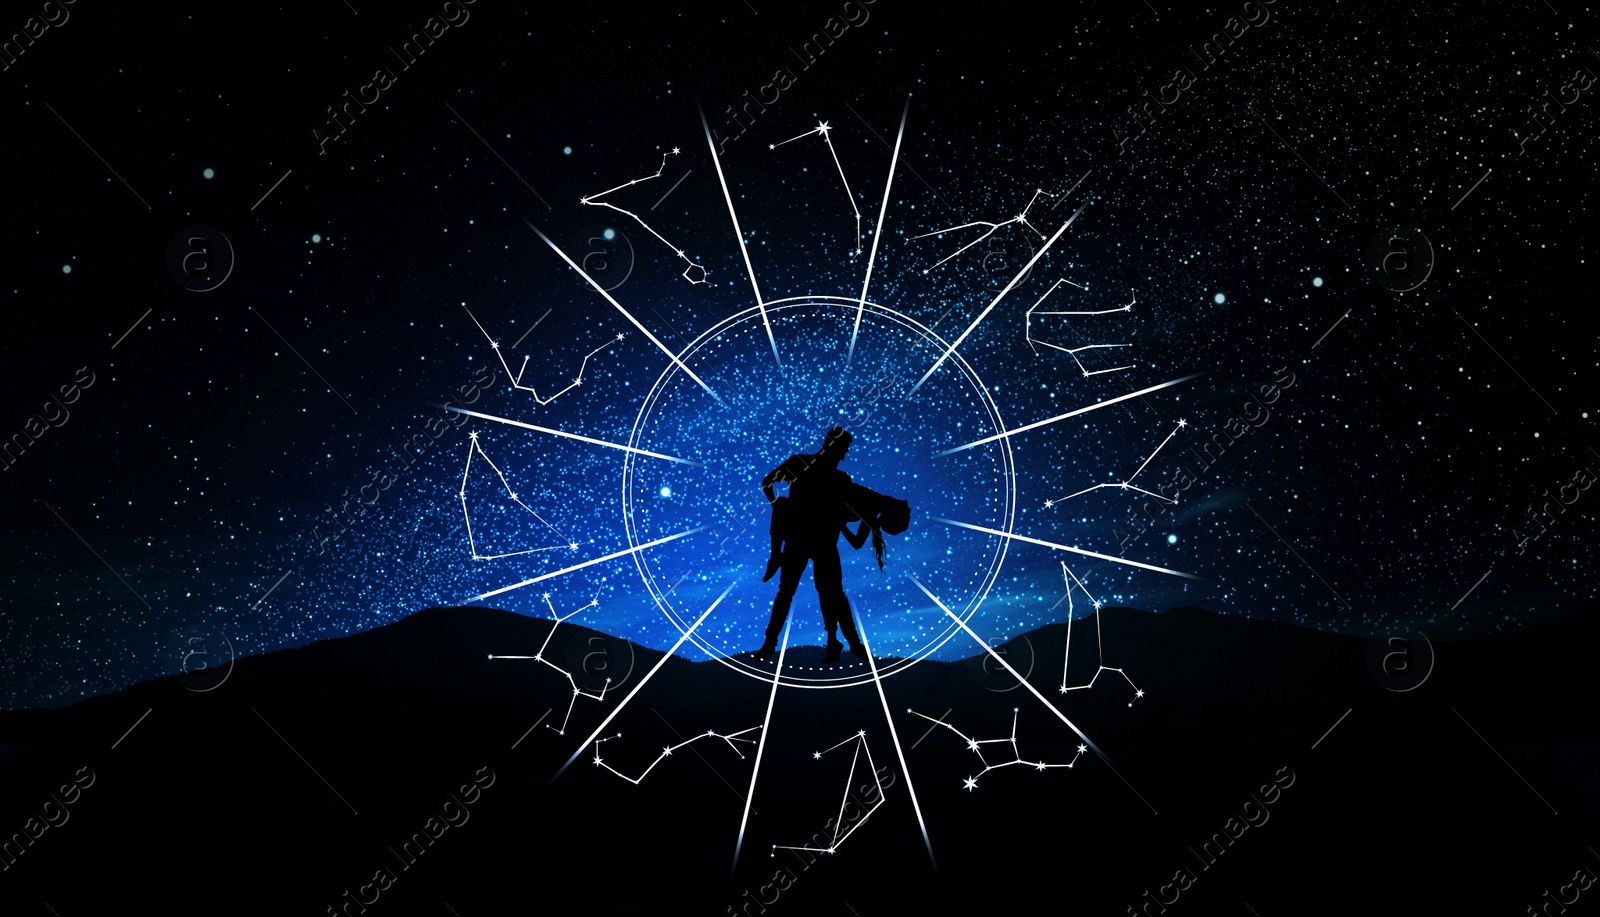 Image of Zodiac wheel and photo of couple in mountains under starry sky at night. Banner design